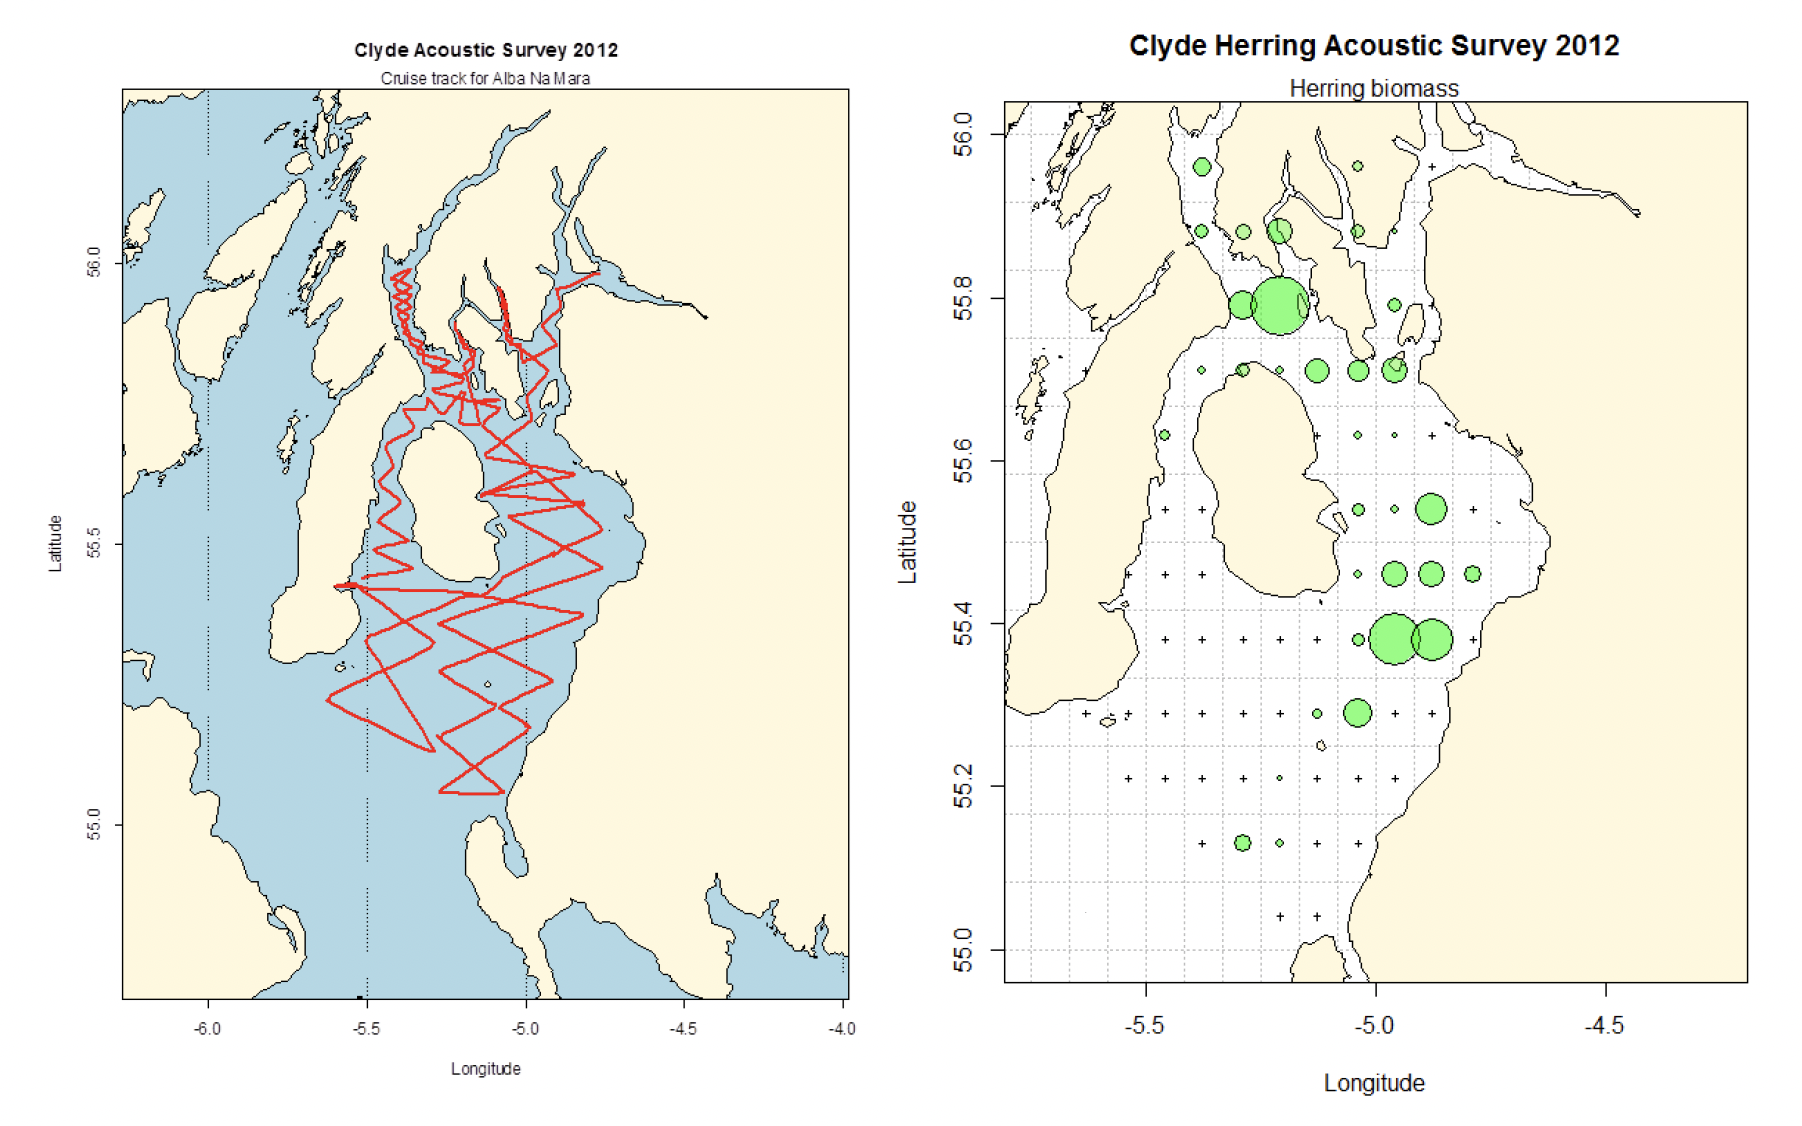 Herring from the Firth of Clyde maps. Left map shows cruise track for MRV Alba na Mara and right map shows distribution of herring biomass in Clyde pelagic acoustic survey 2012